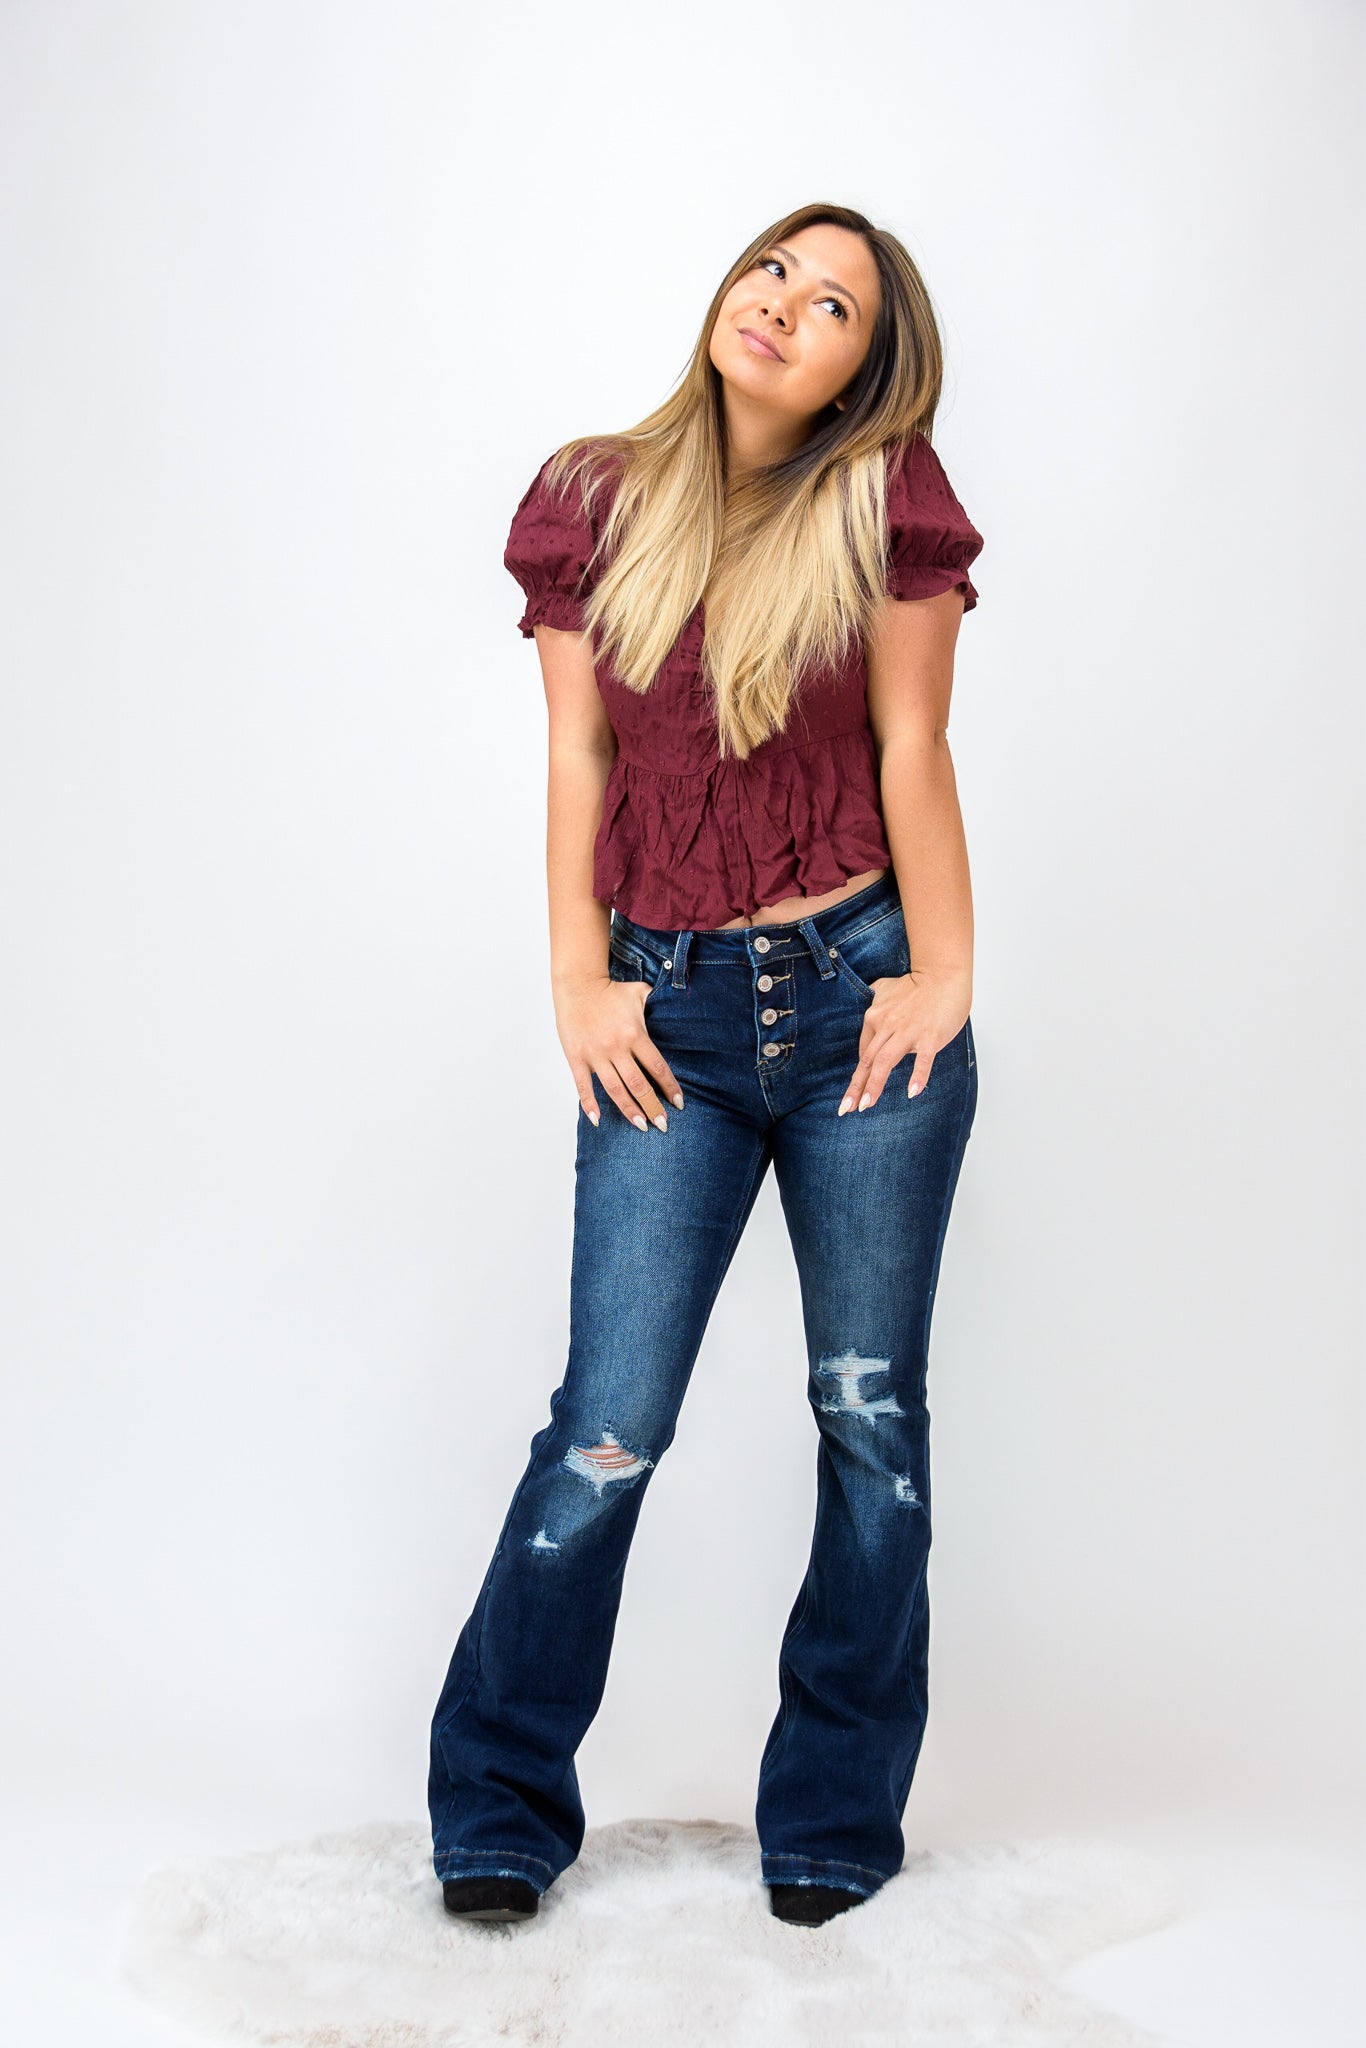 These pair of Fire't Up Kan Cans are the perfect pair of jeans for the girls that like a little sass! With Bootcut 